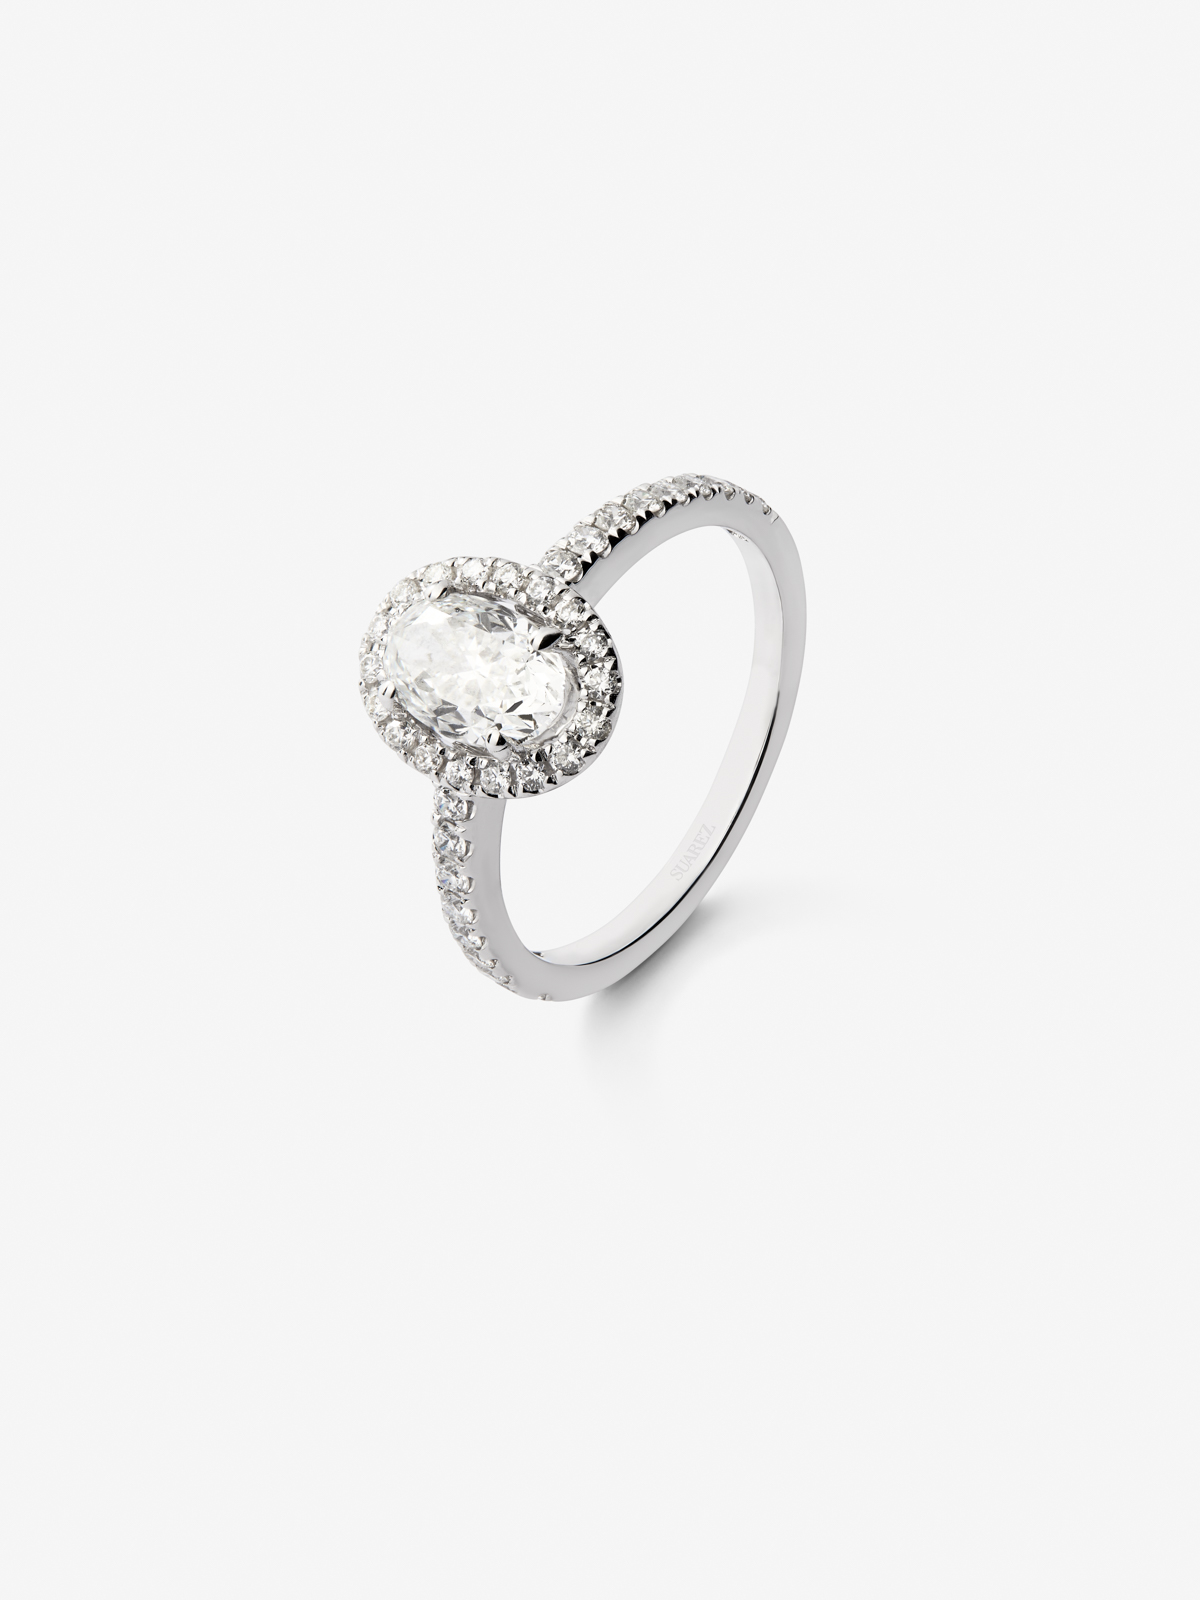 18K White Gold Ring with Oval White Diamonds of 1.01 CTS and Bright 0.35 CTS